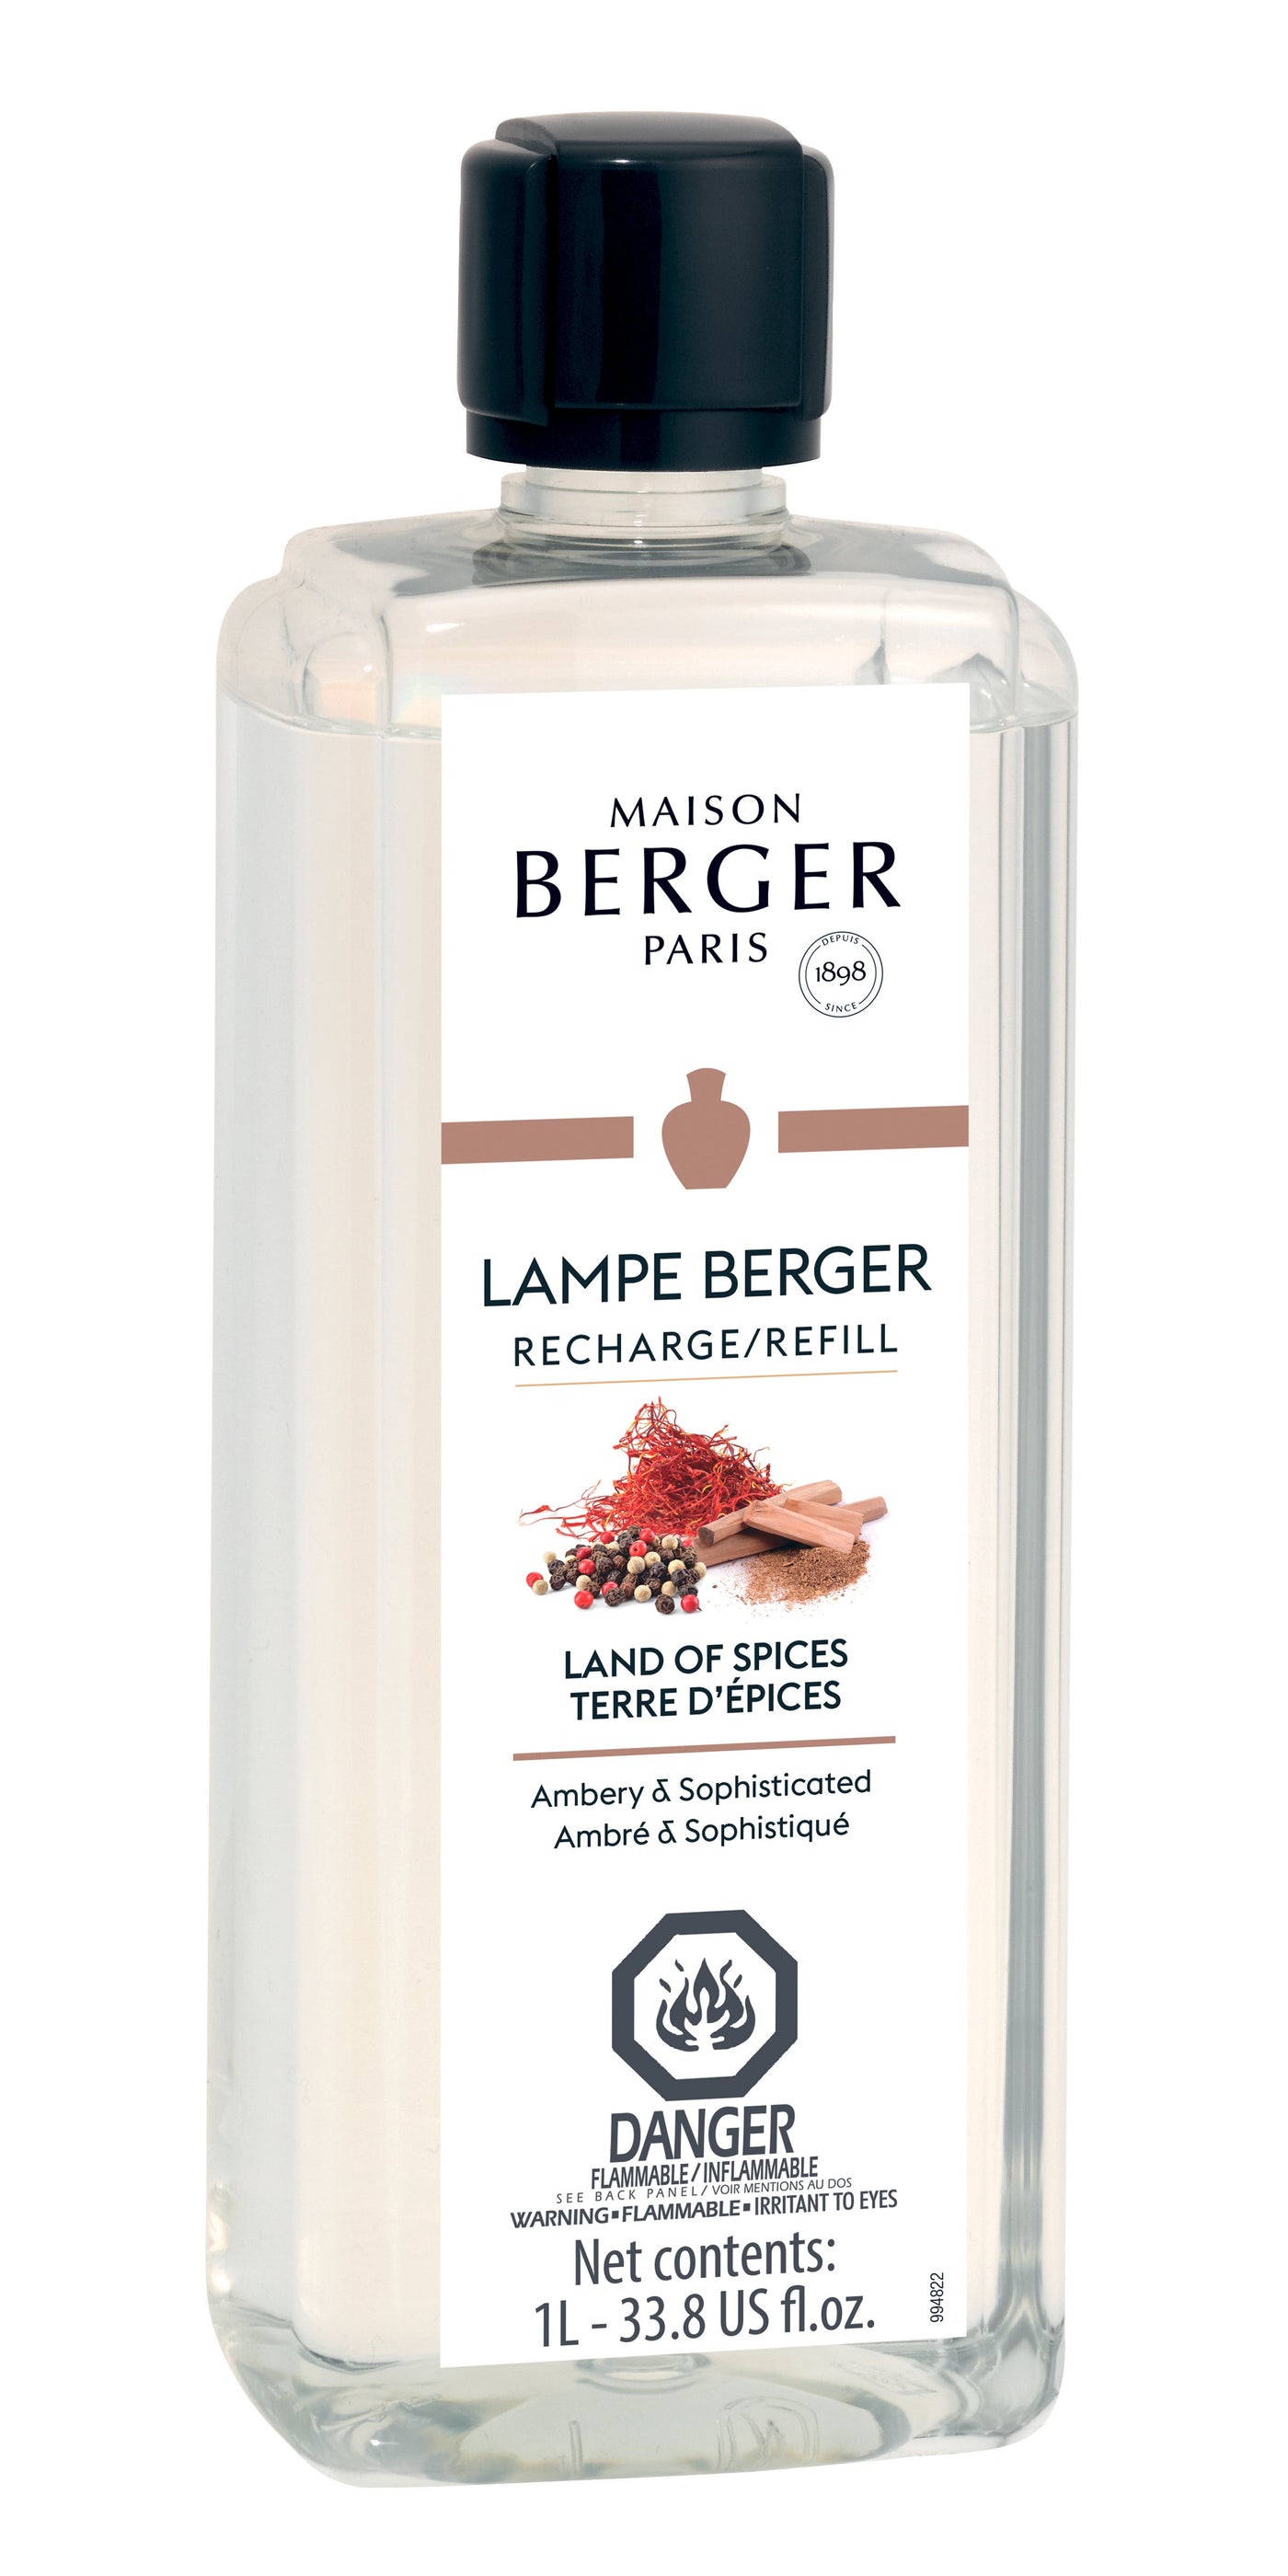 Maison Berger Land of Spices 1L Refill for Lampe Berger